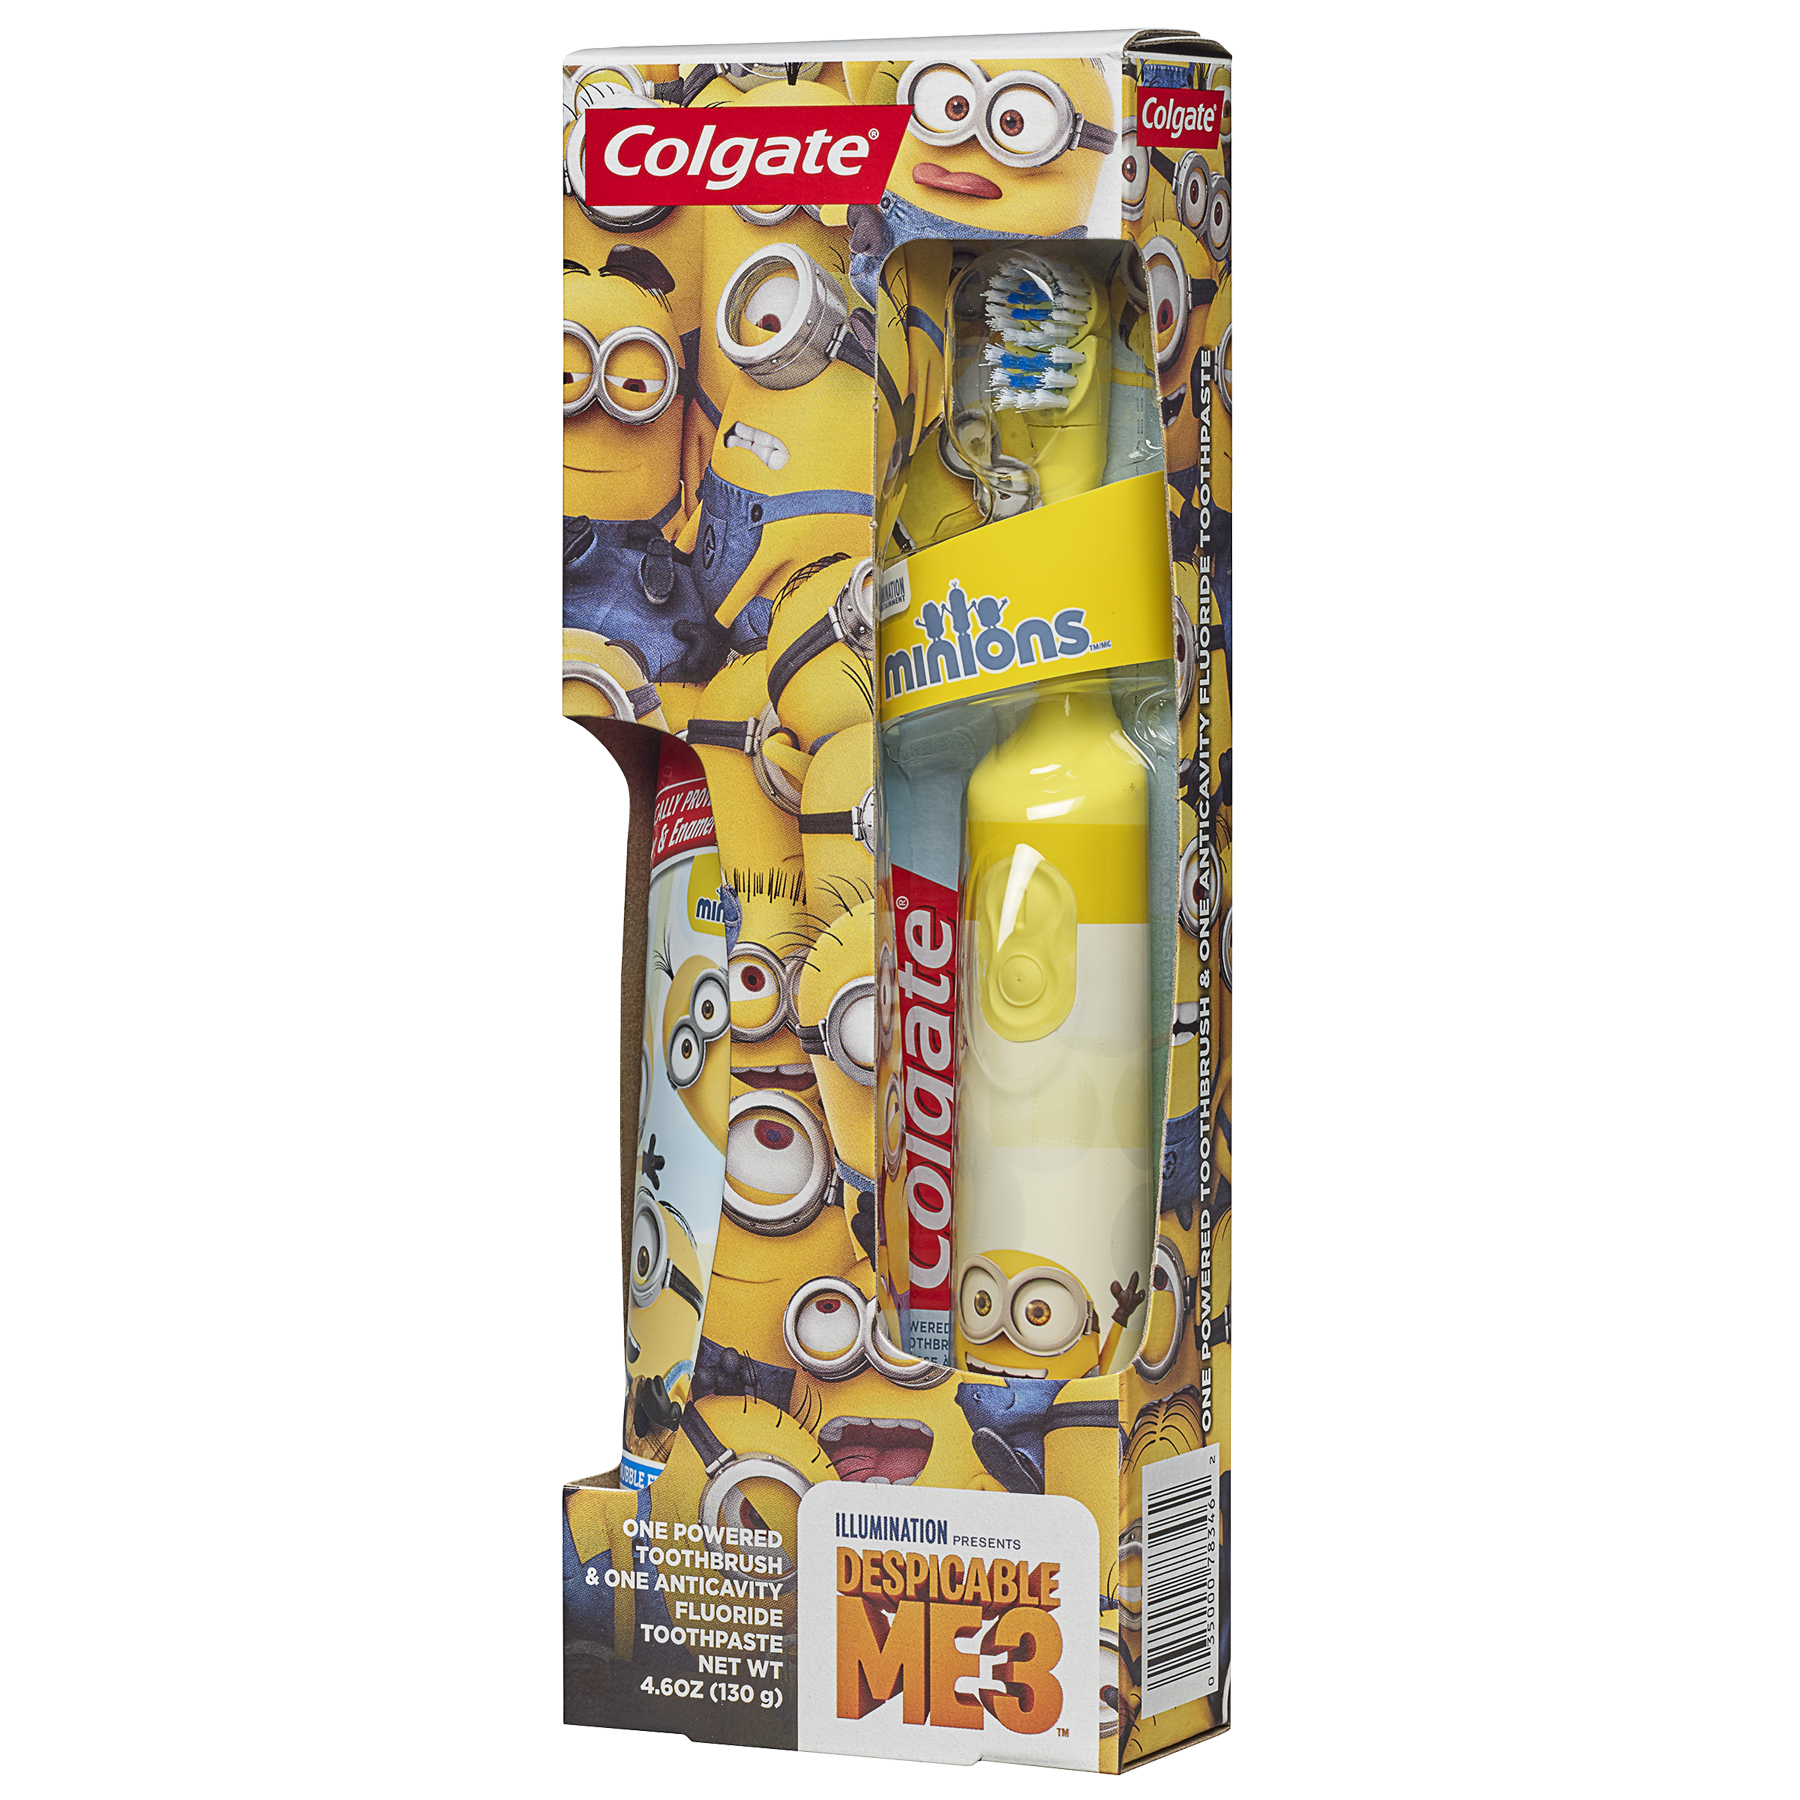 Colgate Kids Powered Toothbrush, Toothpaste Pack - Minions - image 3 of 10